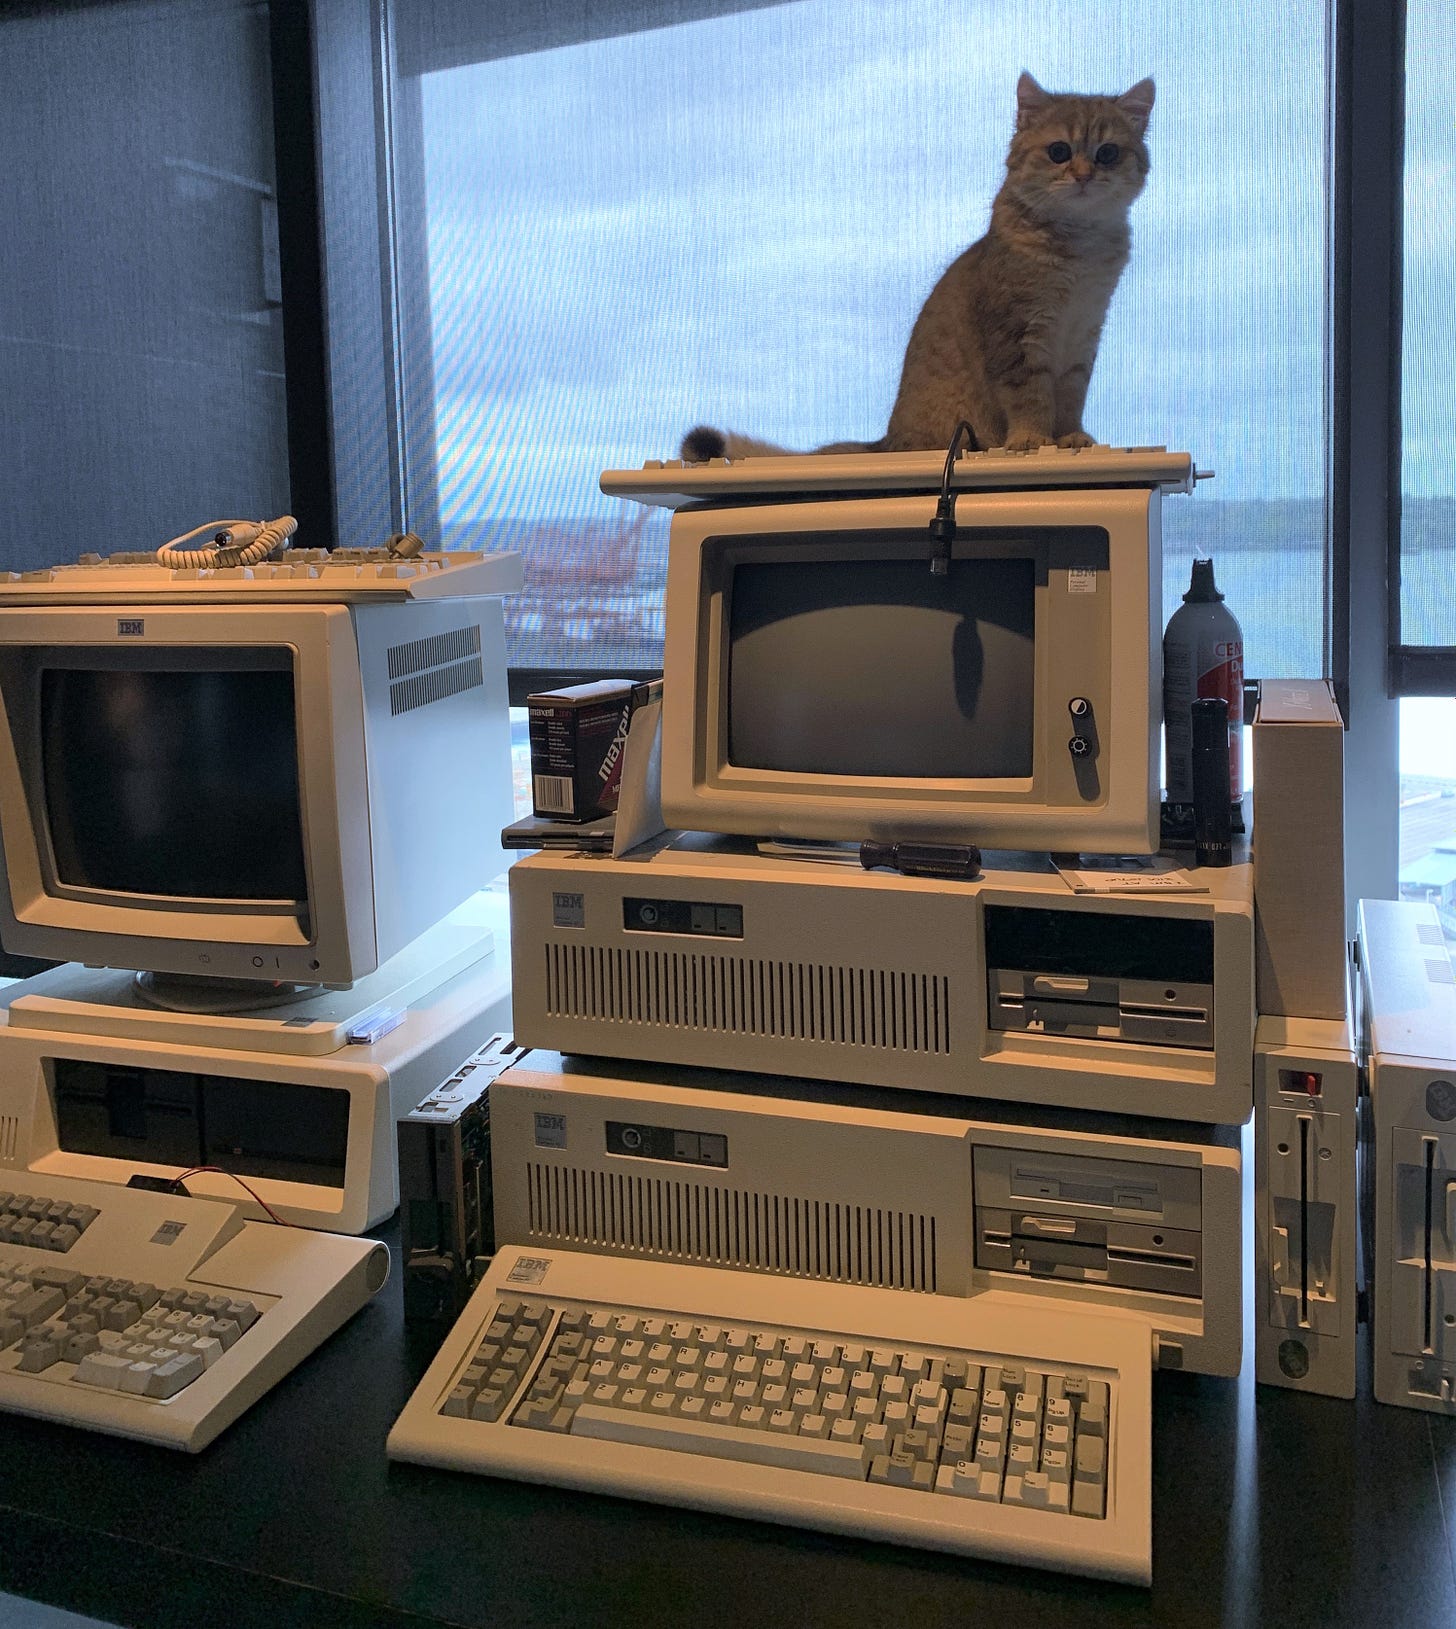 Several IBM PC vintage computers. A small kitten sitting on top of one of the cathode ray tube monitors.